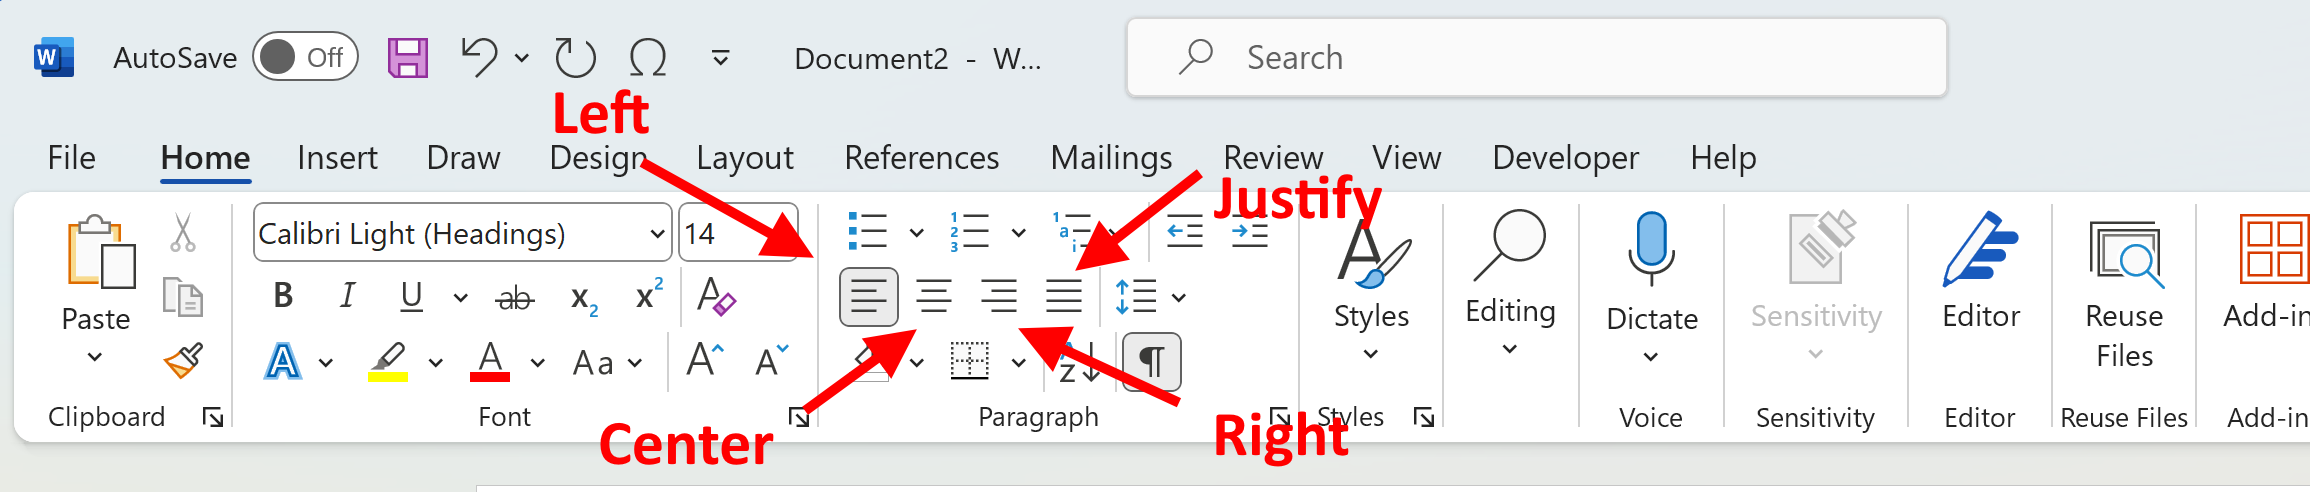 Learn how to align text in Microsoft Word using center, justify, left, and right alignment options. Create visually appealing and organized documents with proper text alignment.